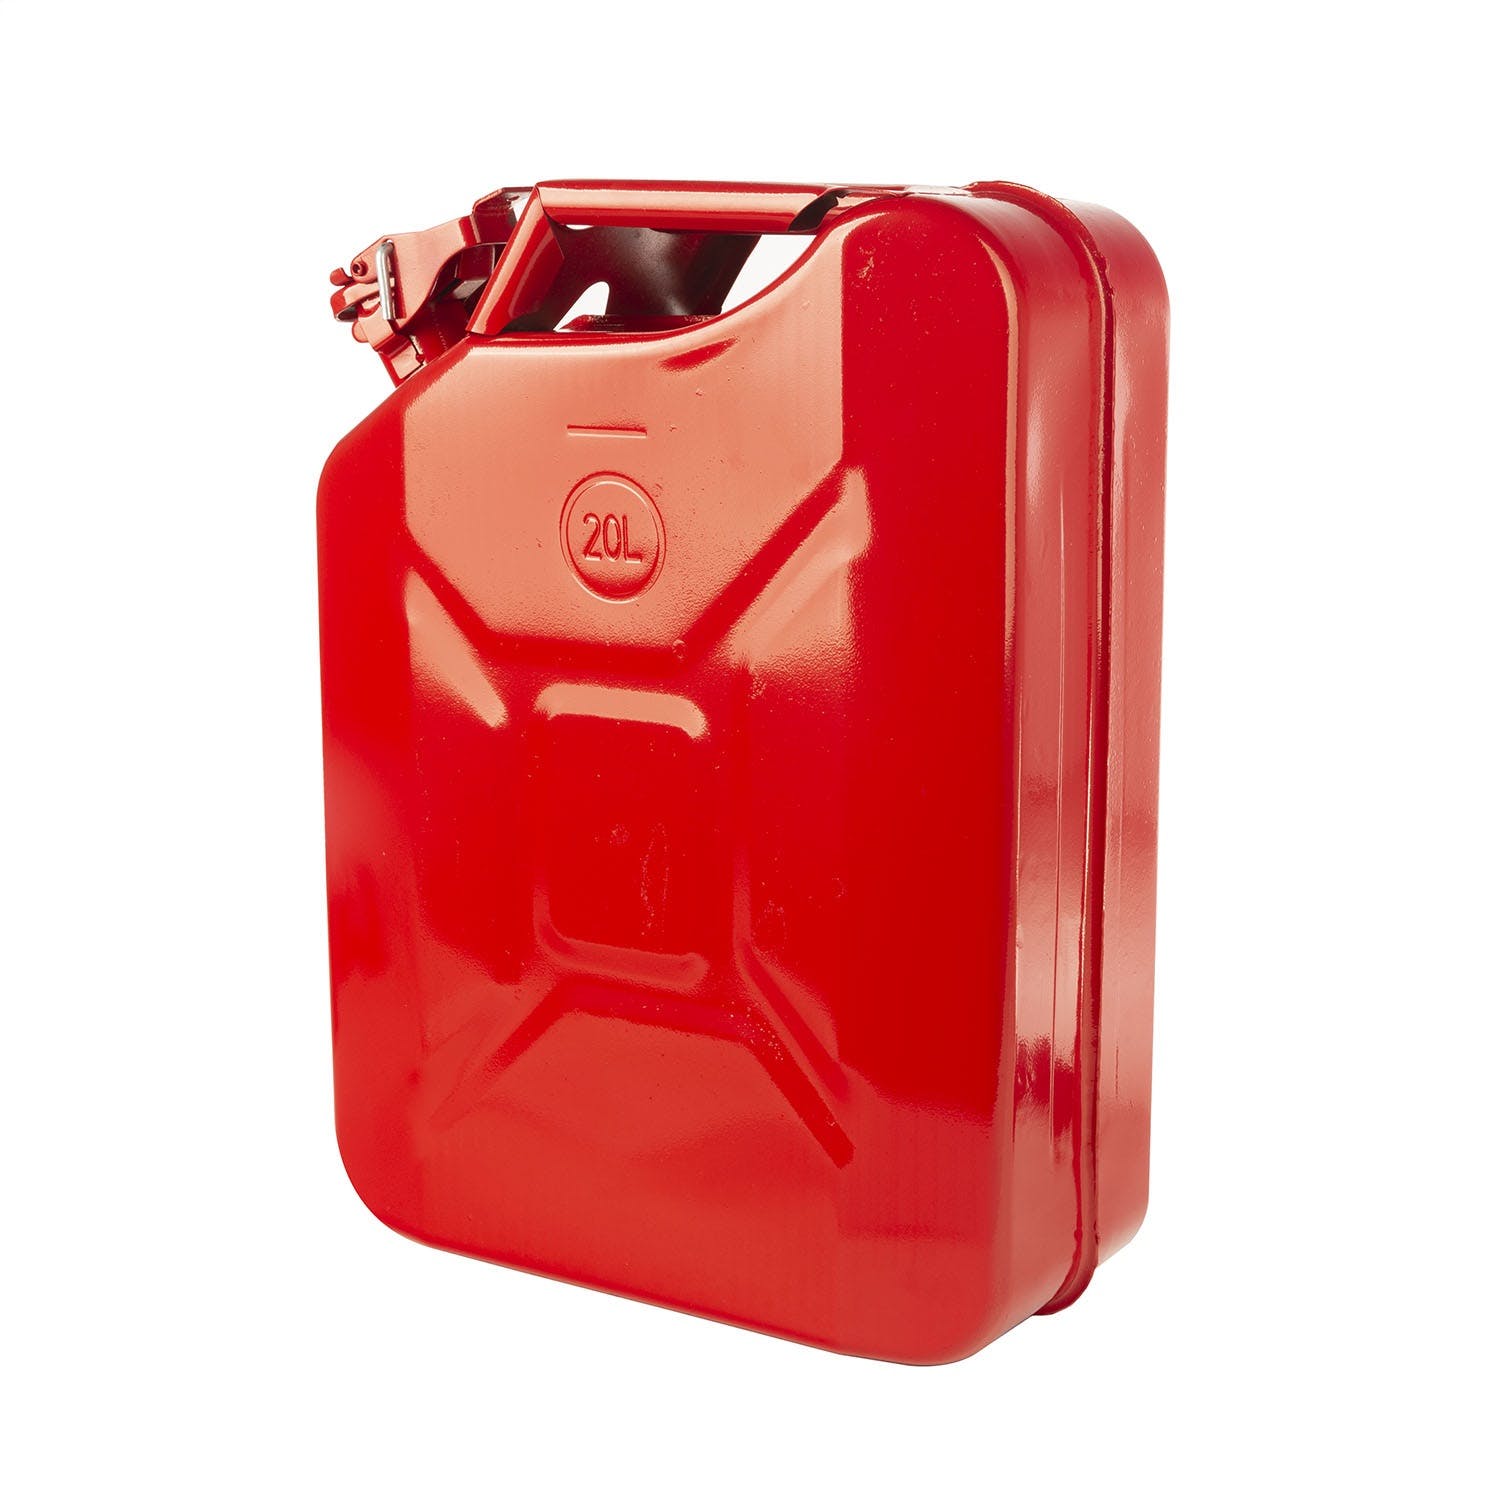 Rugged Ridge 17722.31 Jerry Can, Red, 20L, Metal